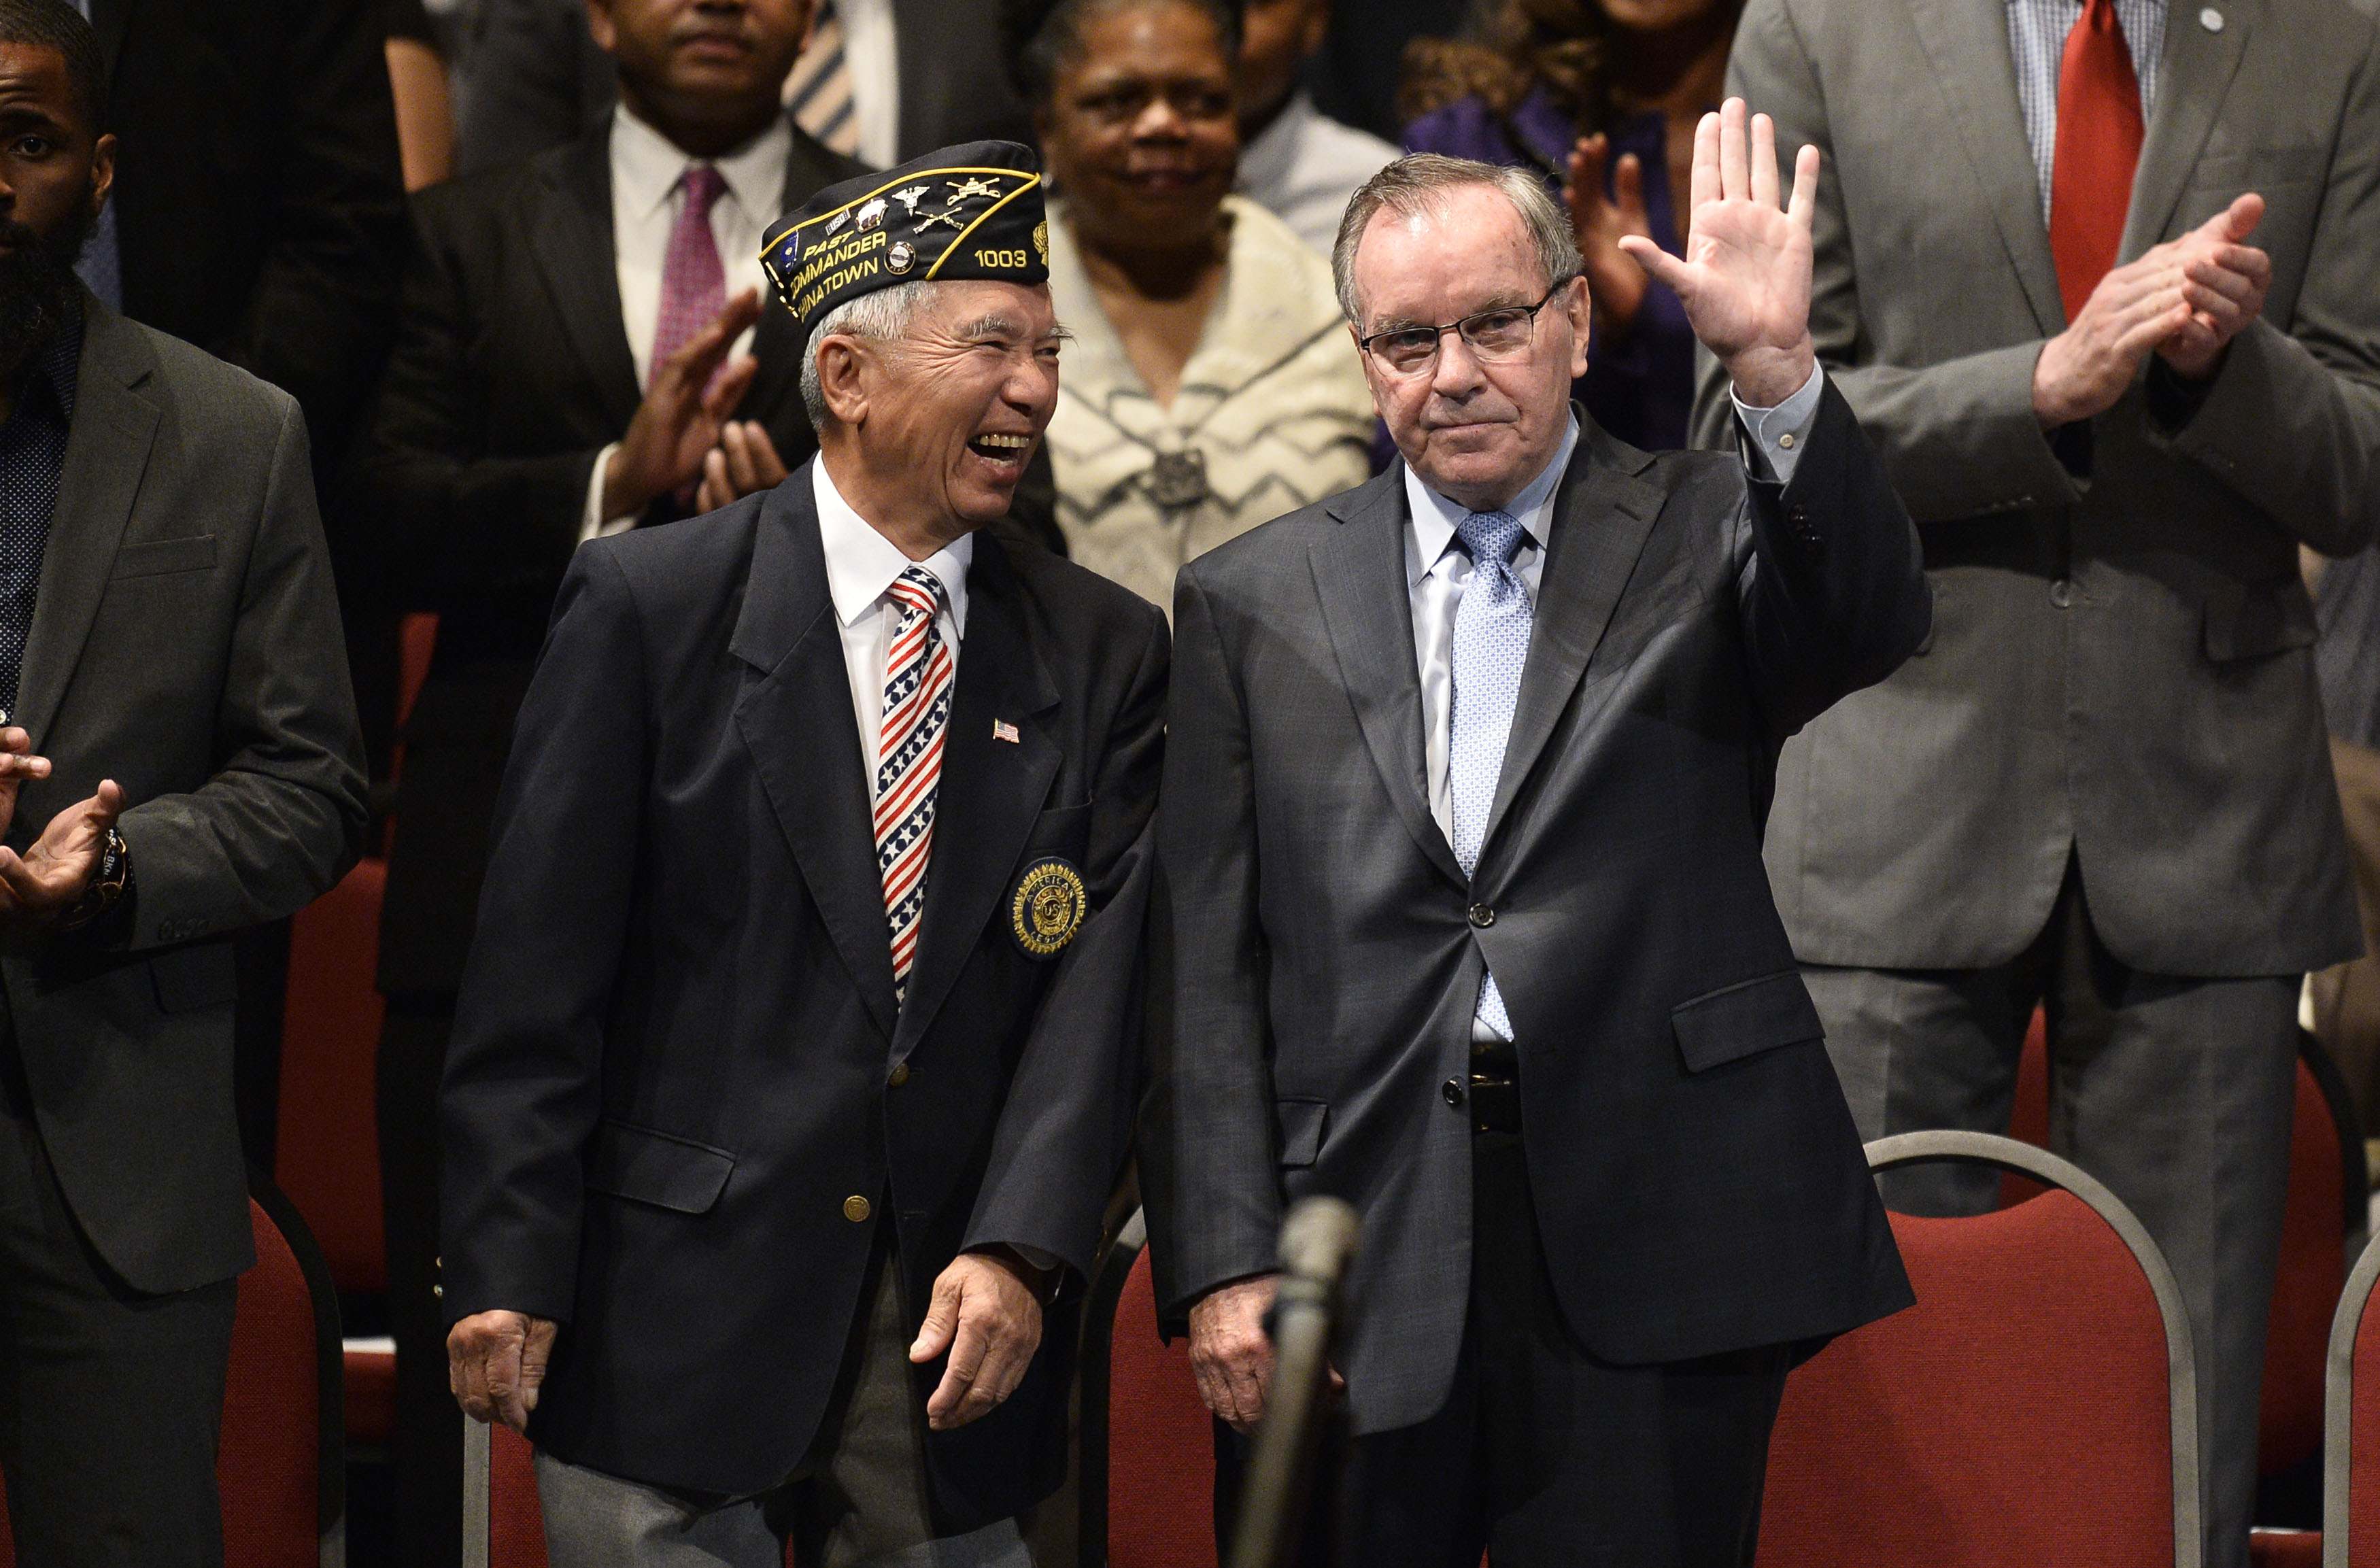 Former Chicago Mayor Richard M. Daley (R) stands with Lt. Col. Phillip Chen, retired, as he waves to the audience as he is introduced at the inauguration ceremony for Chicago Mayor Rahm Emanuel and other elected officials at the Chicago Theatre.  (Photo by Brian Kersey/Getty Images)